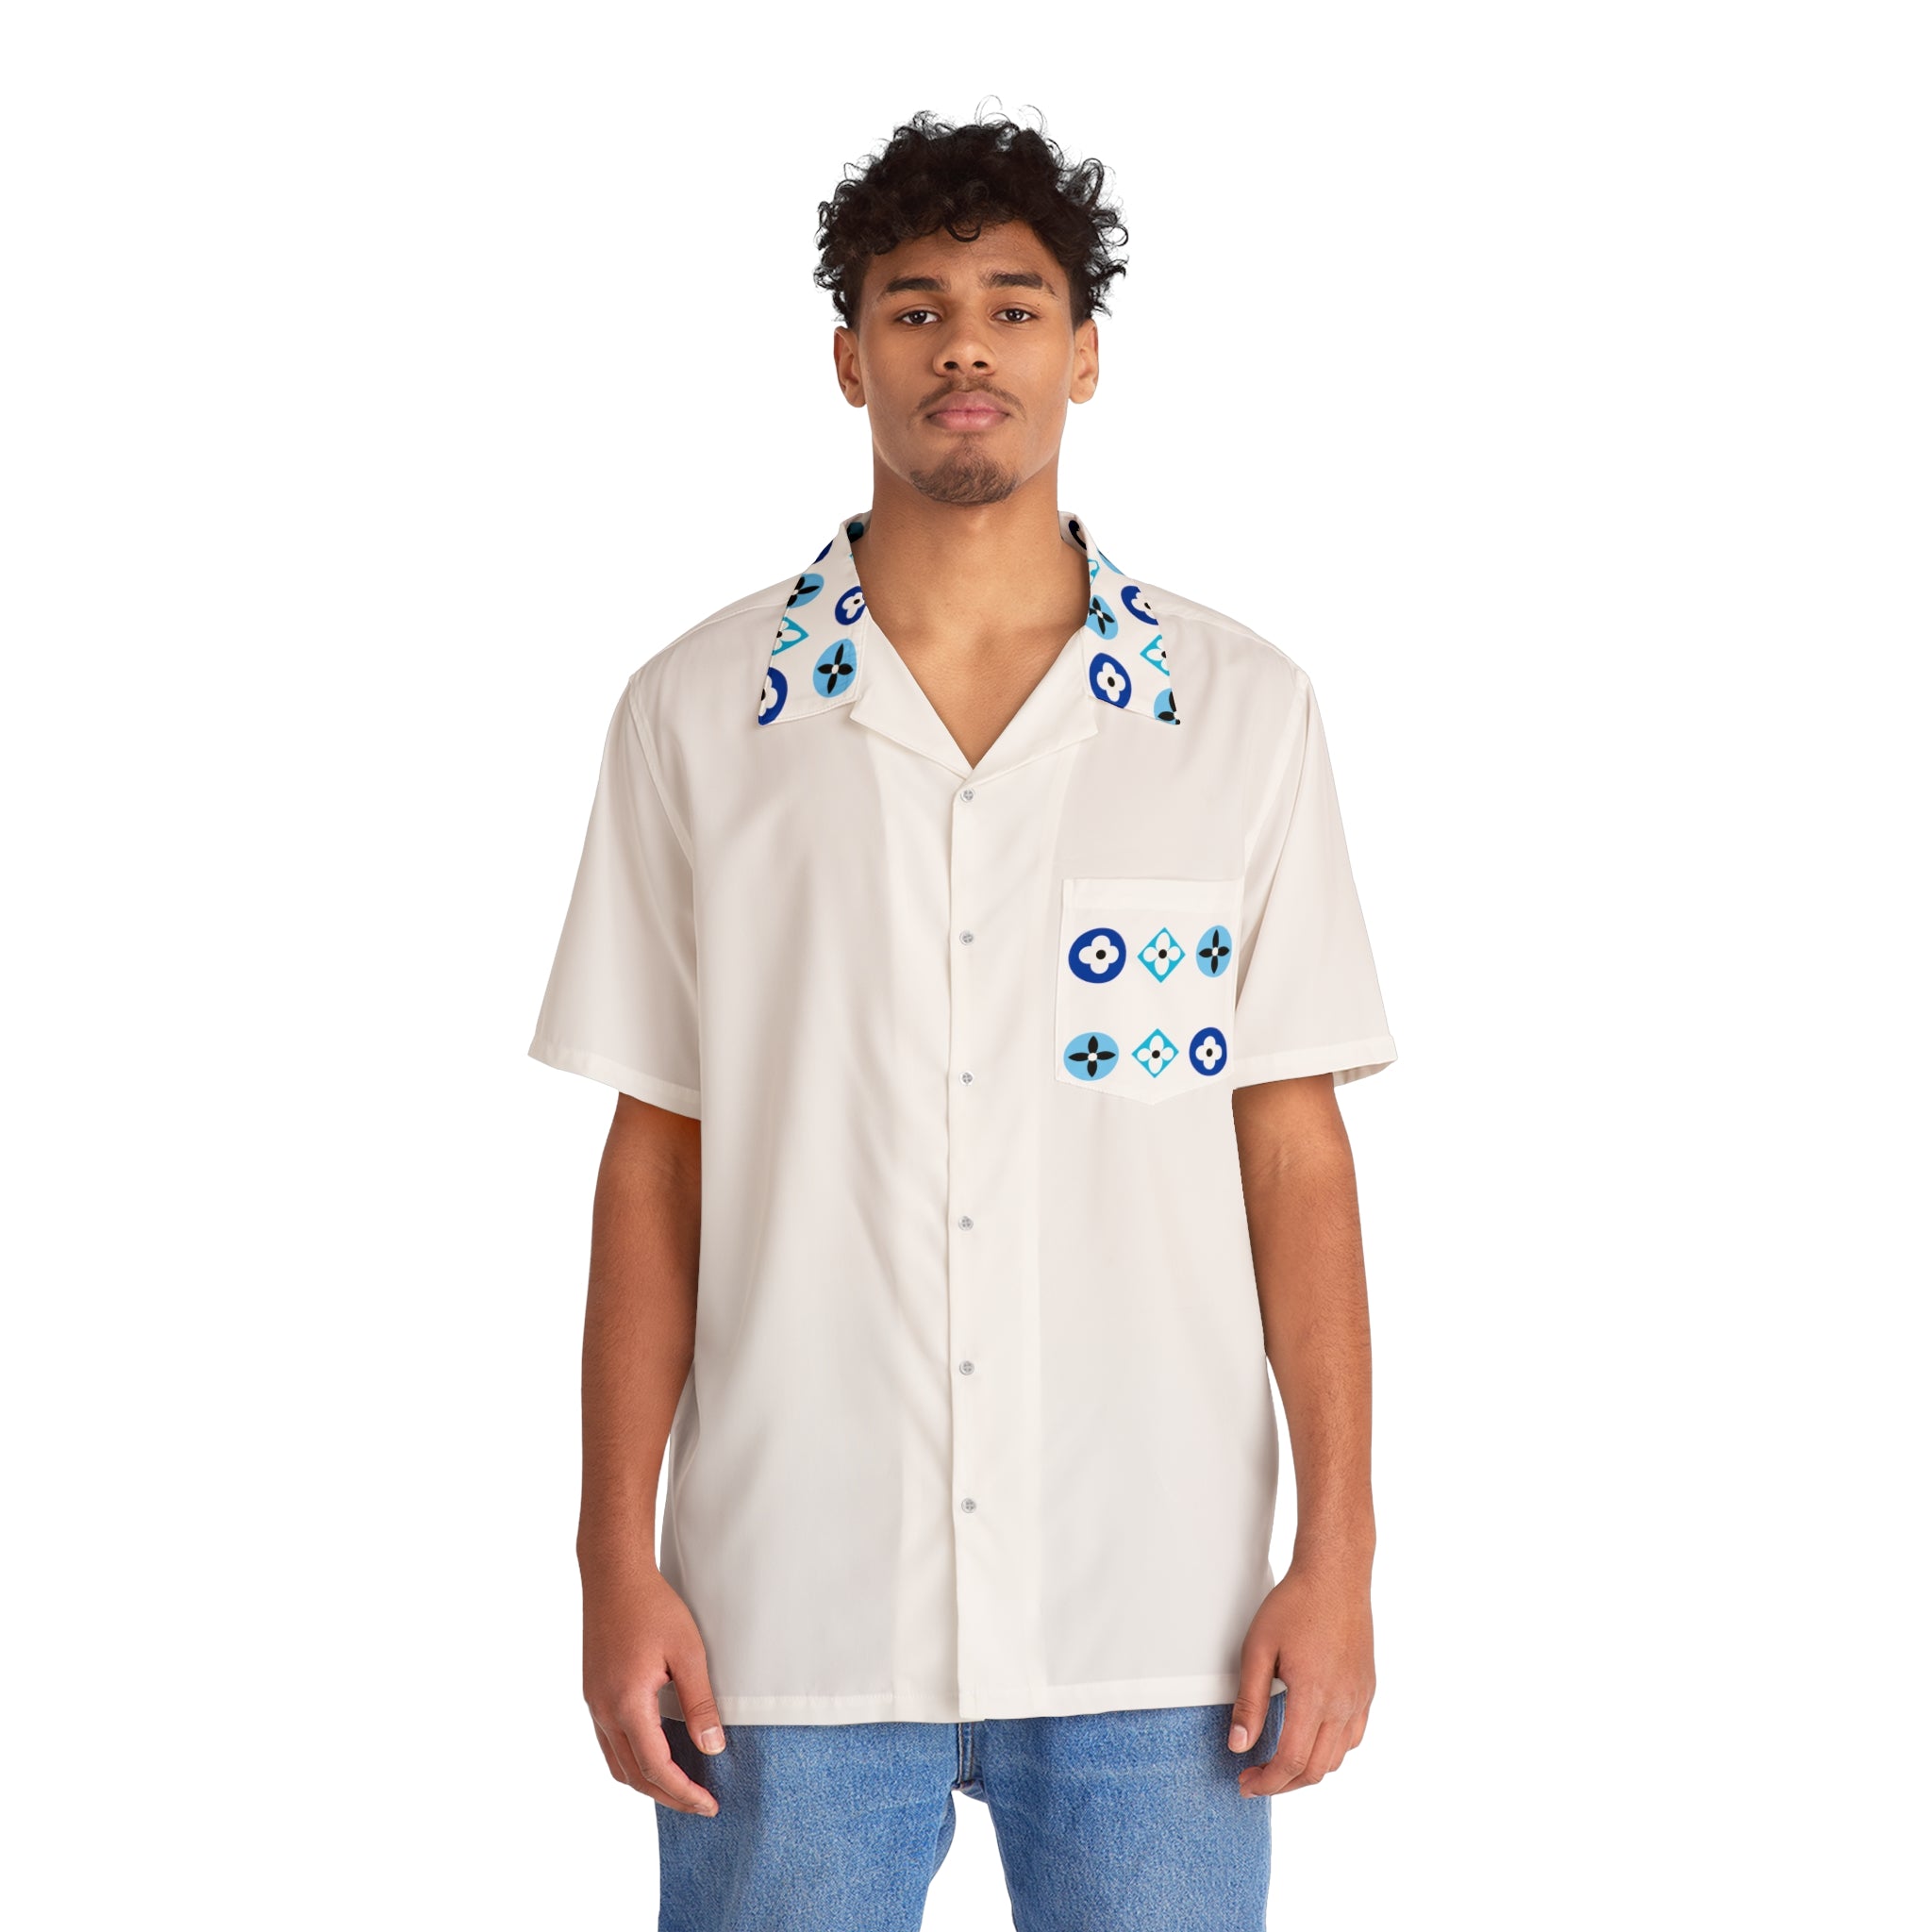  Groove Collection Trilogy of Icons Pocket Grid (Blues) White Unisex Gender Neutral Button Up Shirt, Hawaiian Shirt Shirts